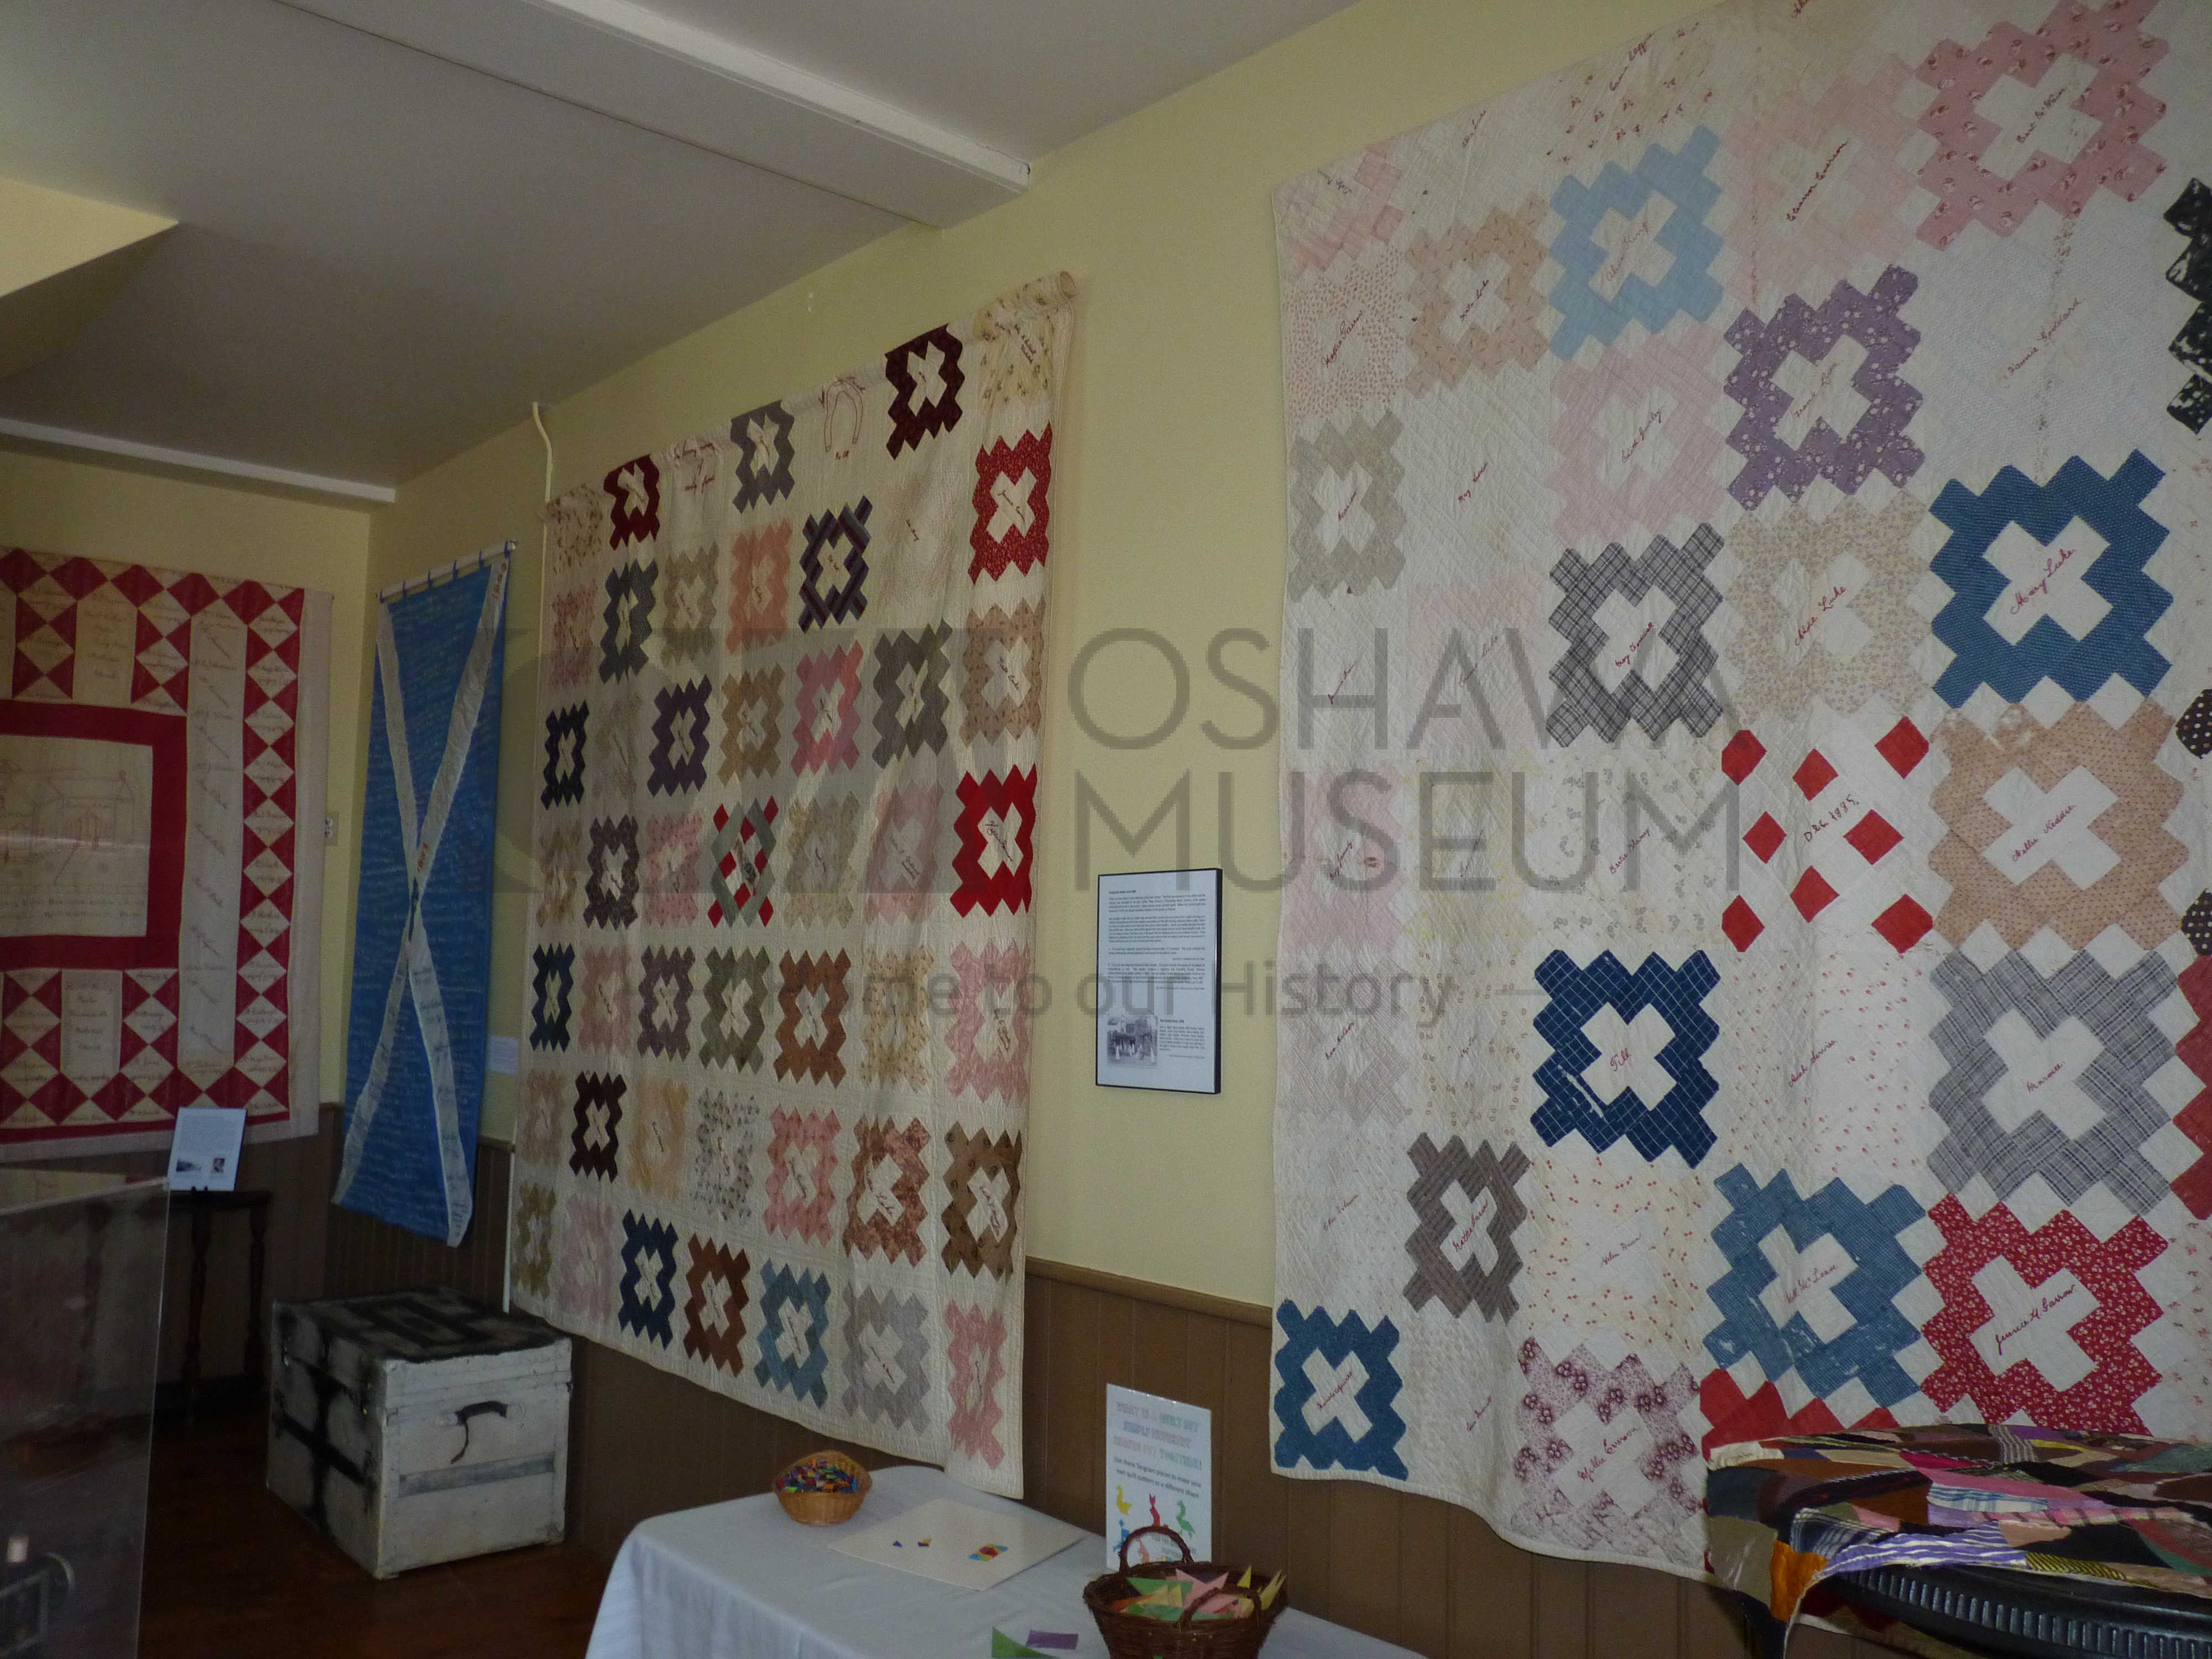 A room with colourful quilts handing on the walls